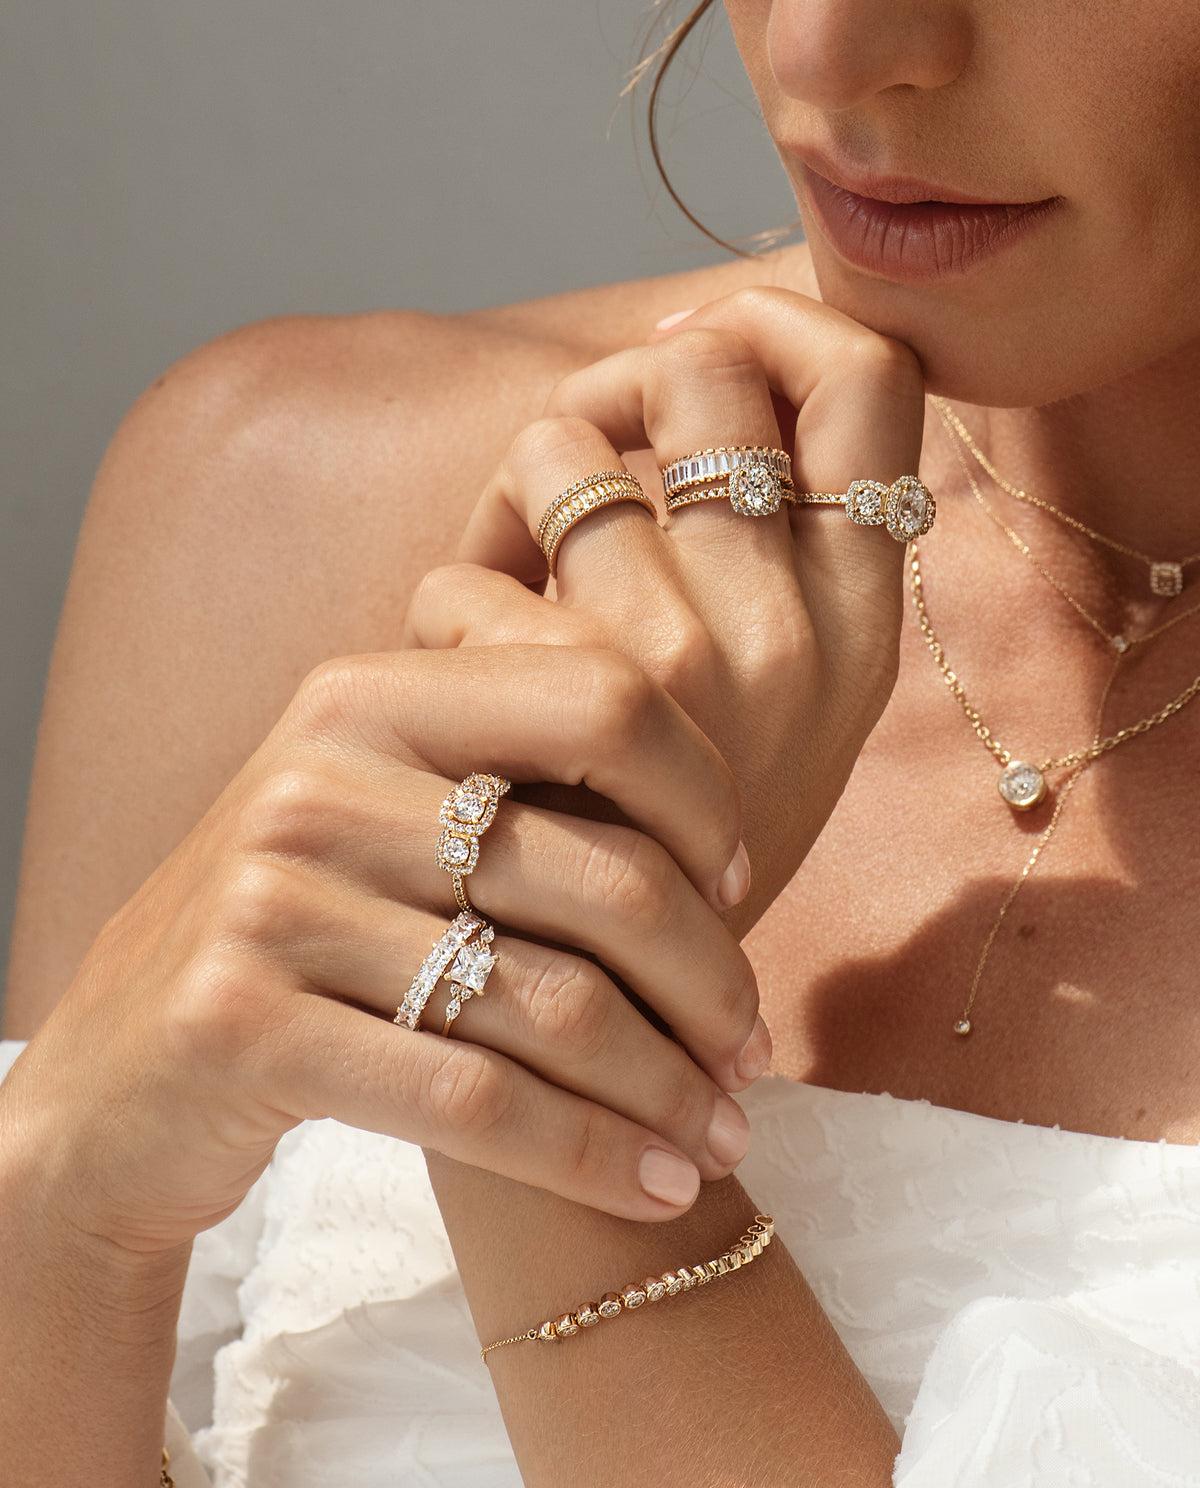 Exquisite jewelry that is meant to reflect the dignity of the person who wears it